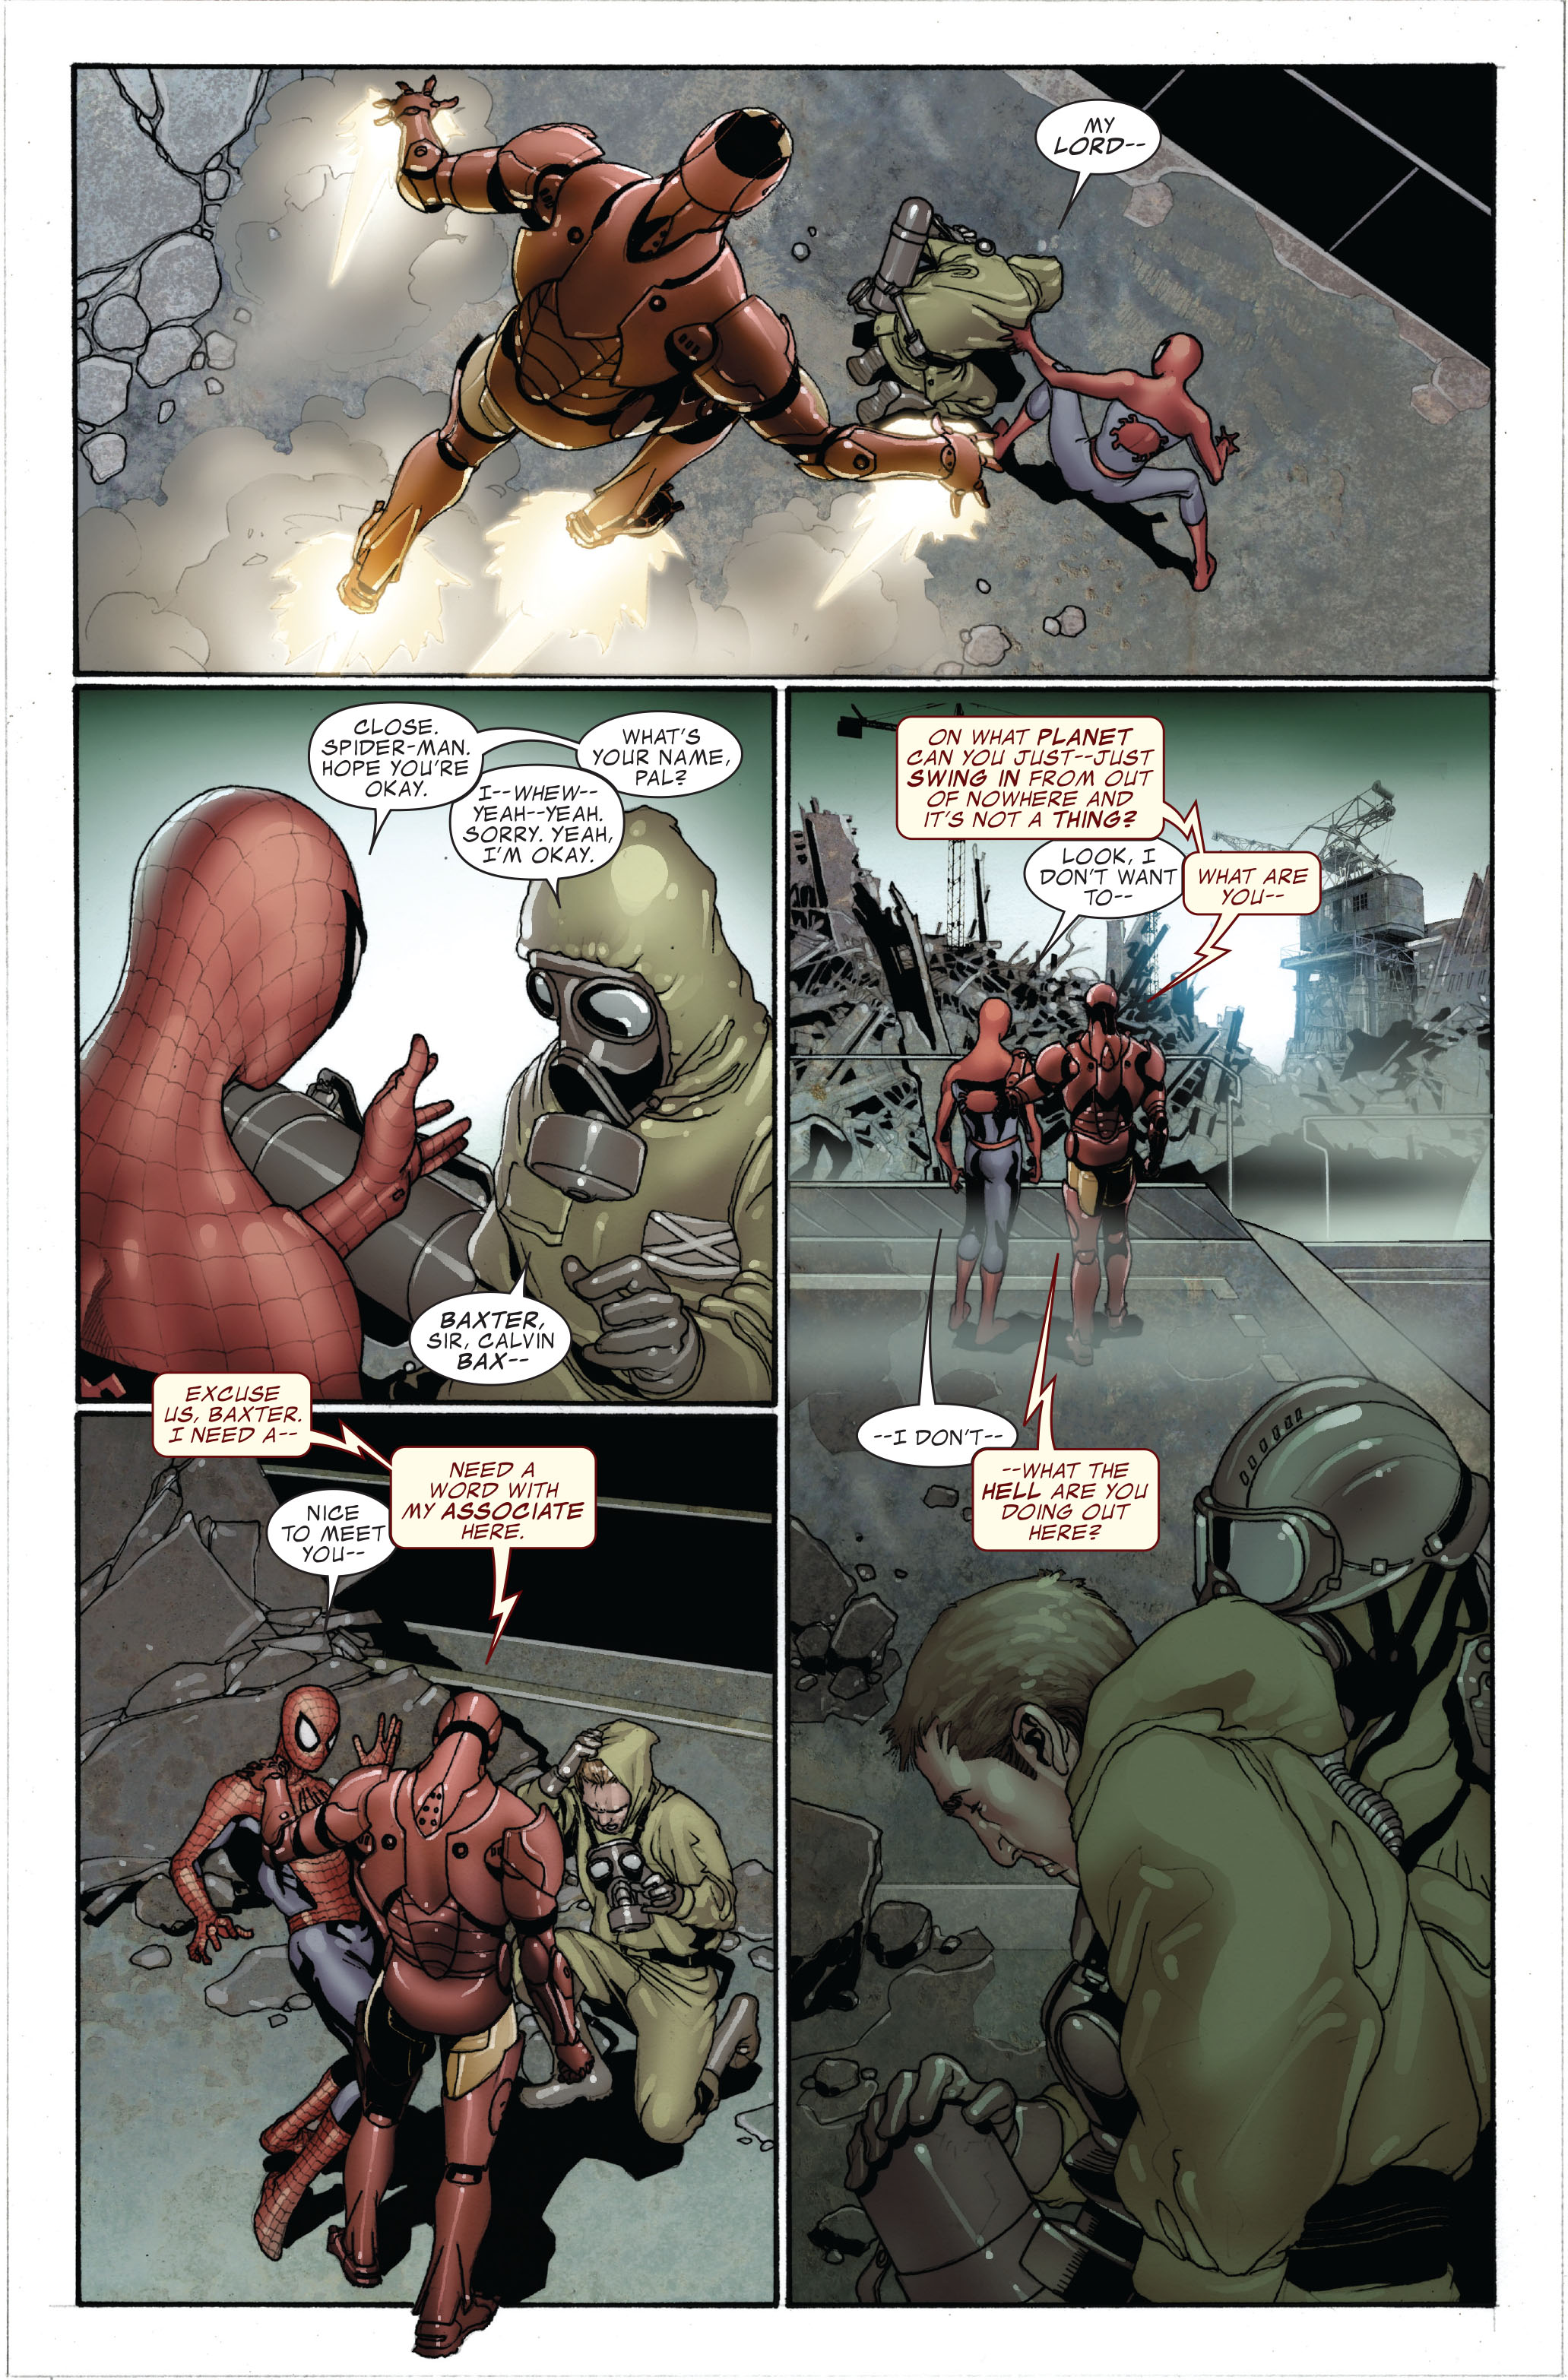 Invincible Iron Man (2008) 7 Page 6